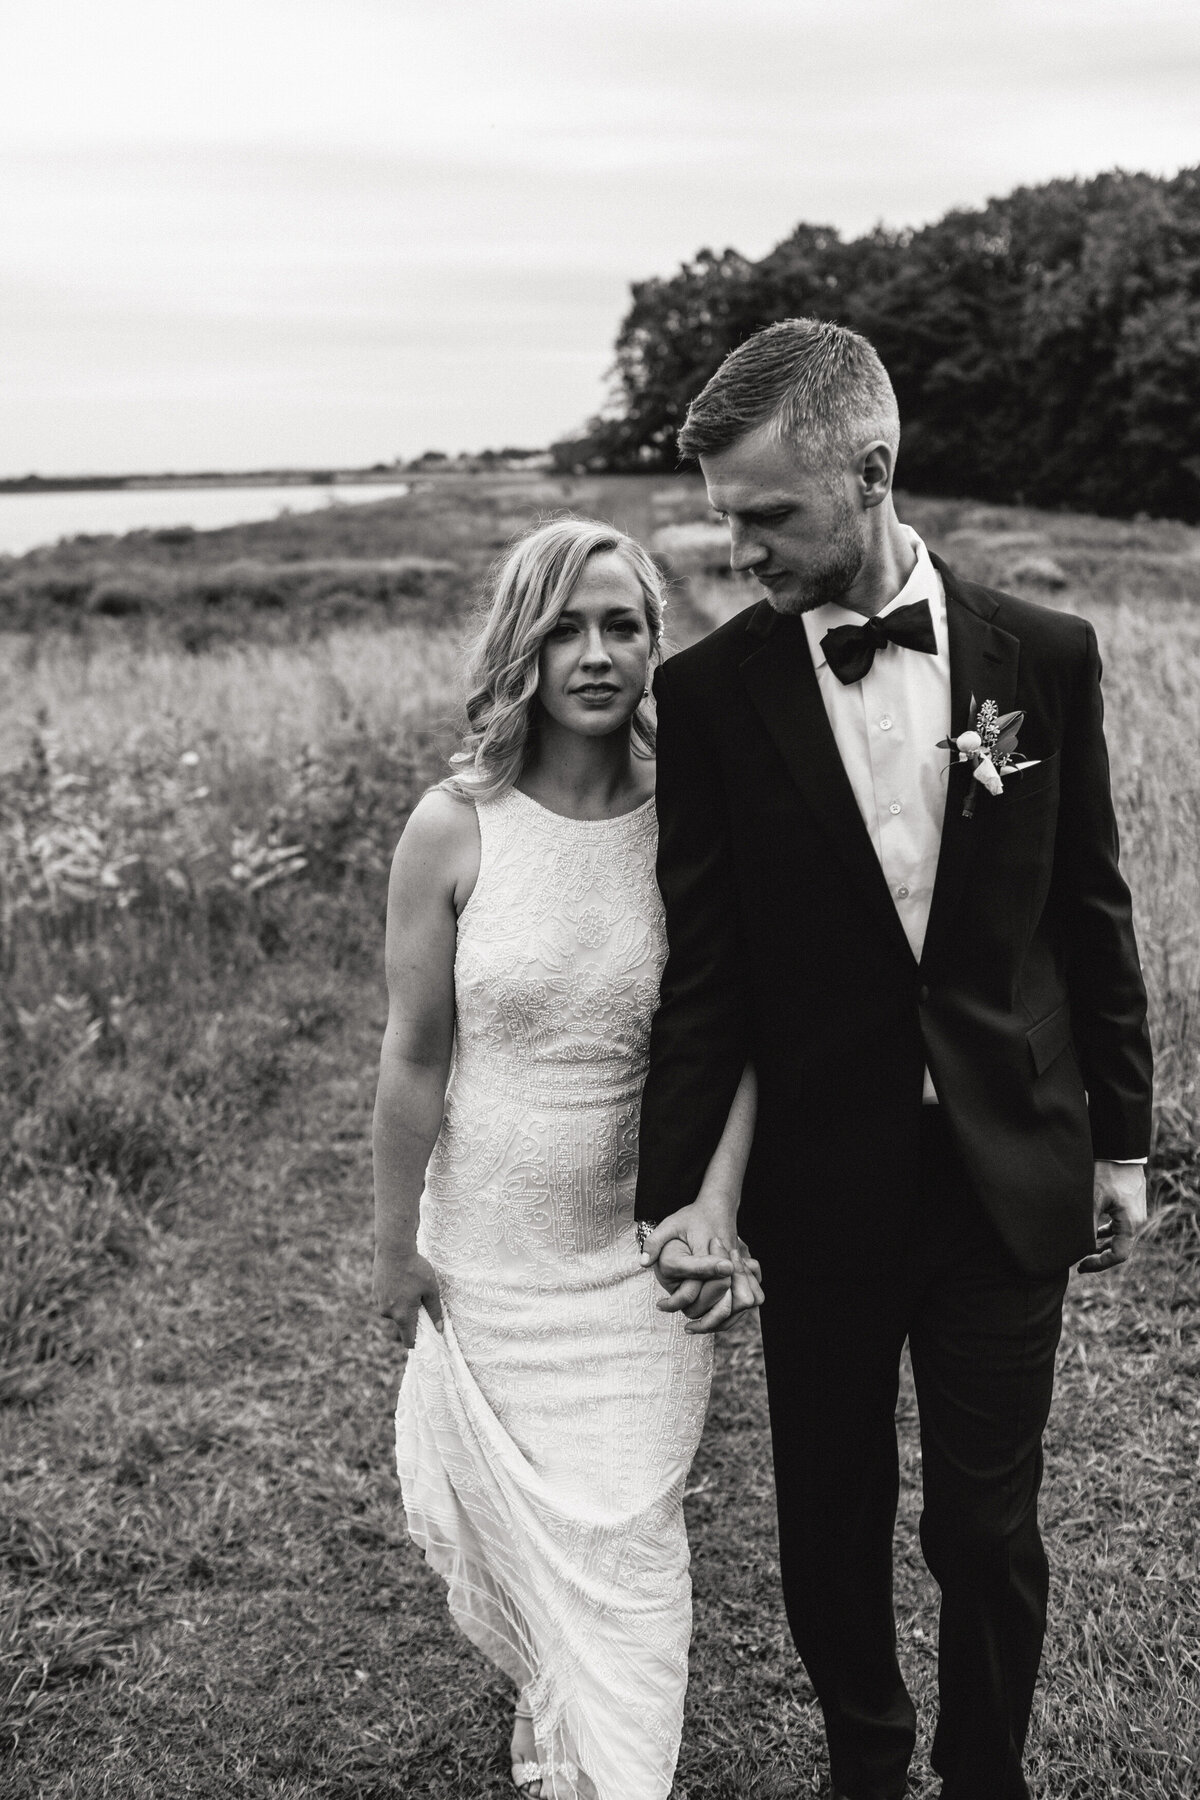 A black and white photograph of Lindsay and Tom on their wedding day at Thompson Island in Boston, Massachusetts. The bride and groom are walking towards the camera, hand-in-hand, through a field of natural grass. The bride is looking into the camera and the groom is looking towards her. The groom is wearing a black tuxedo and the bride is wearing a beaded wedding dress. In the background is a stand of trees and the water of the channel. Wedding photography by Stacie McChesney/Vitae Weddings.